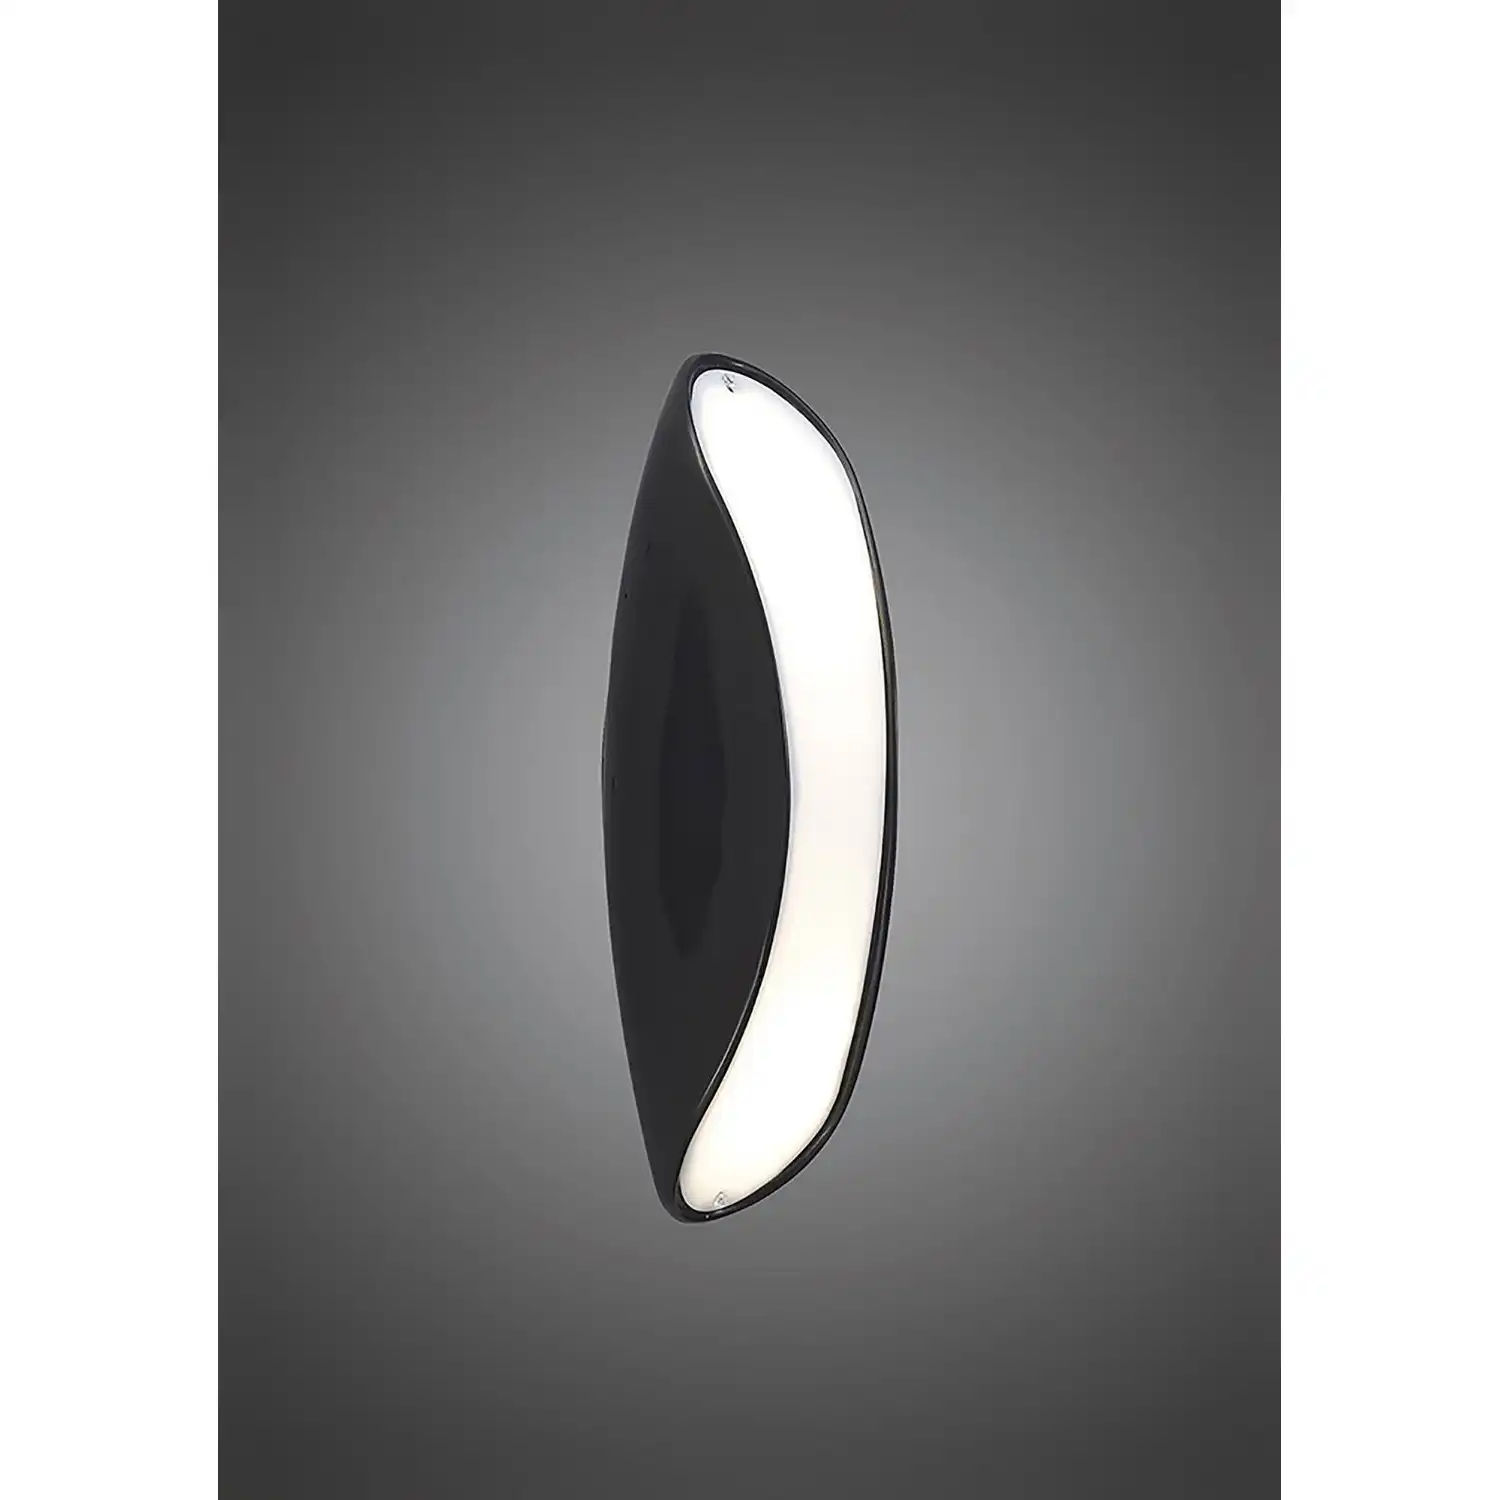 Pasion Wall Lamp 2 Light E27, Gloss Black White Acrylic Polished Chrome, CFL Lamps INCLUDED